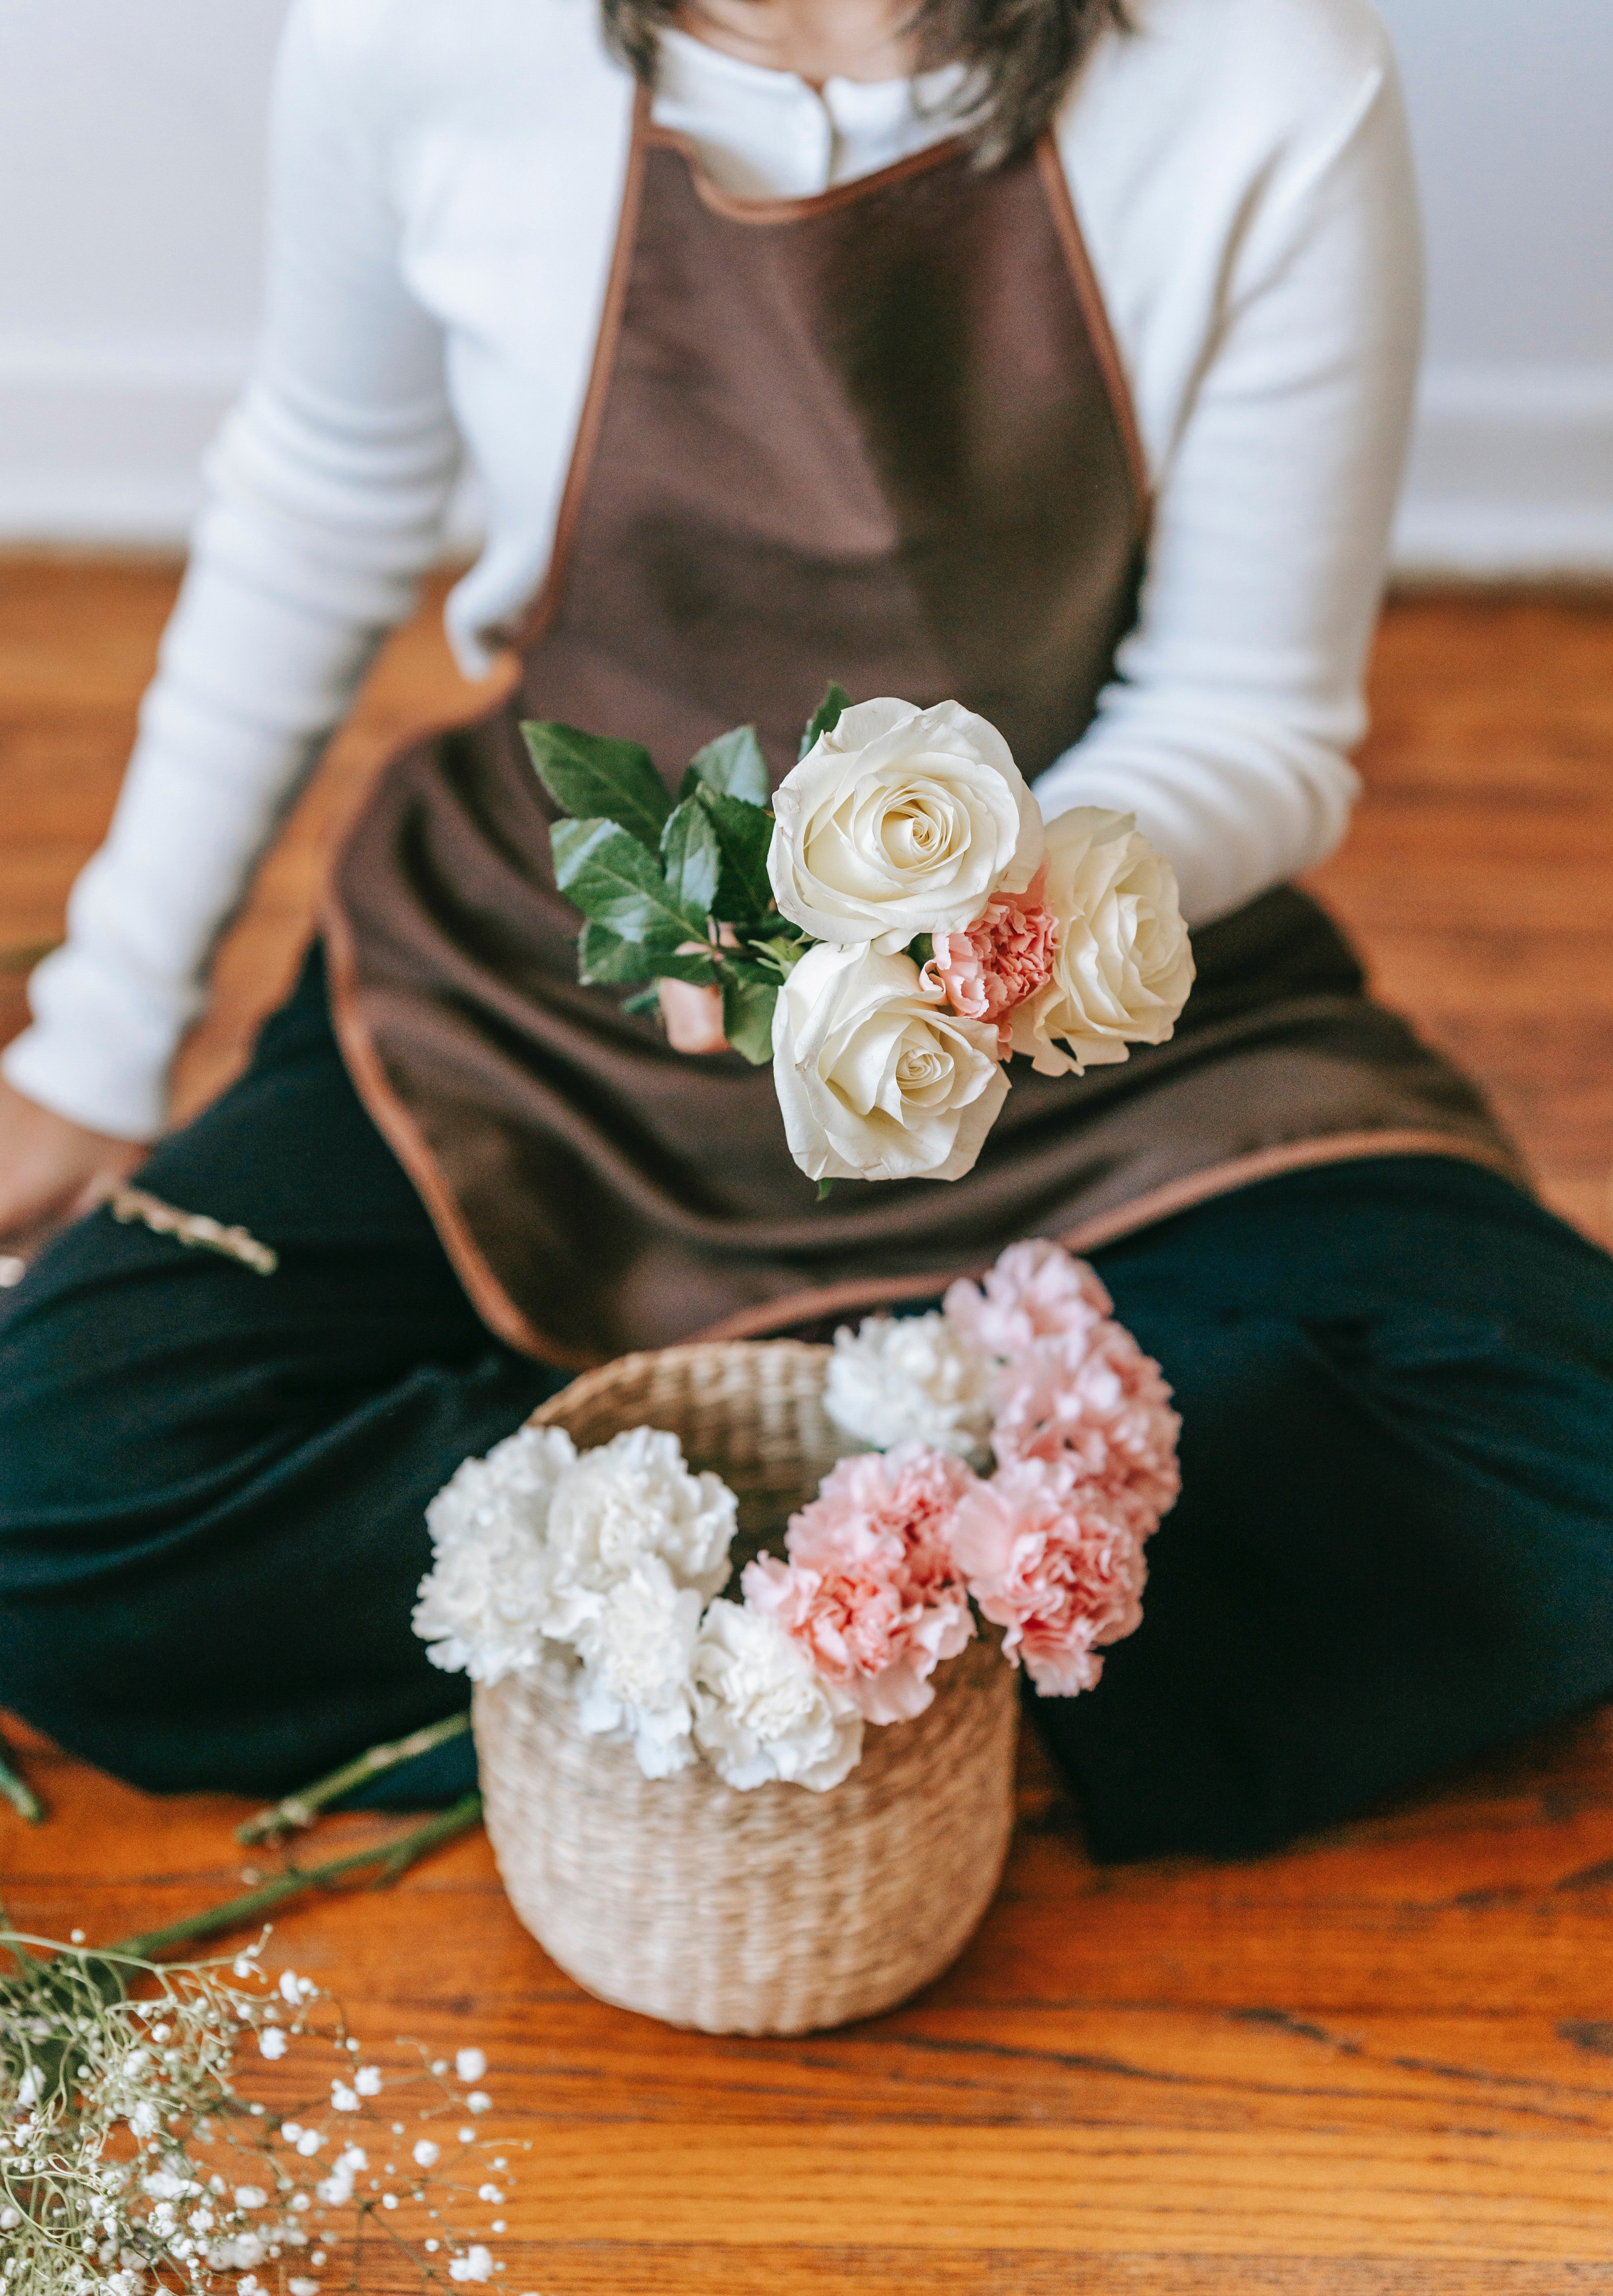 Simon bought flowers for the young woman. | Source: Pexels